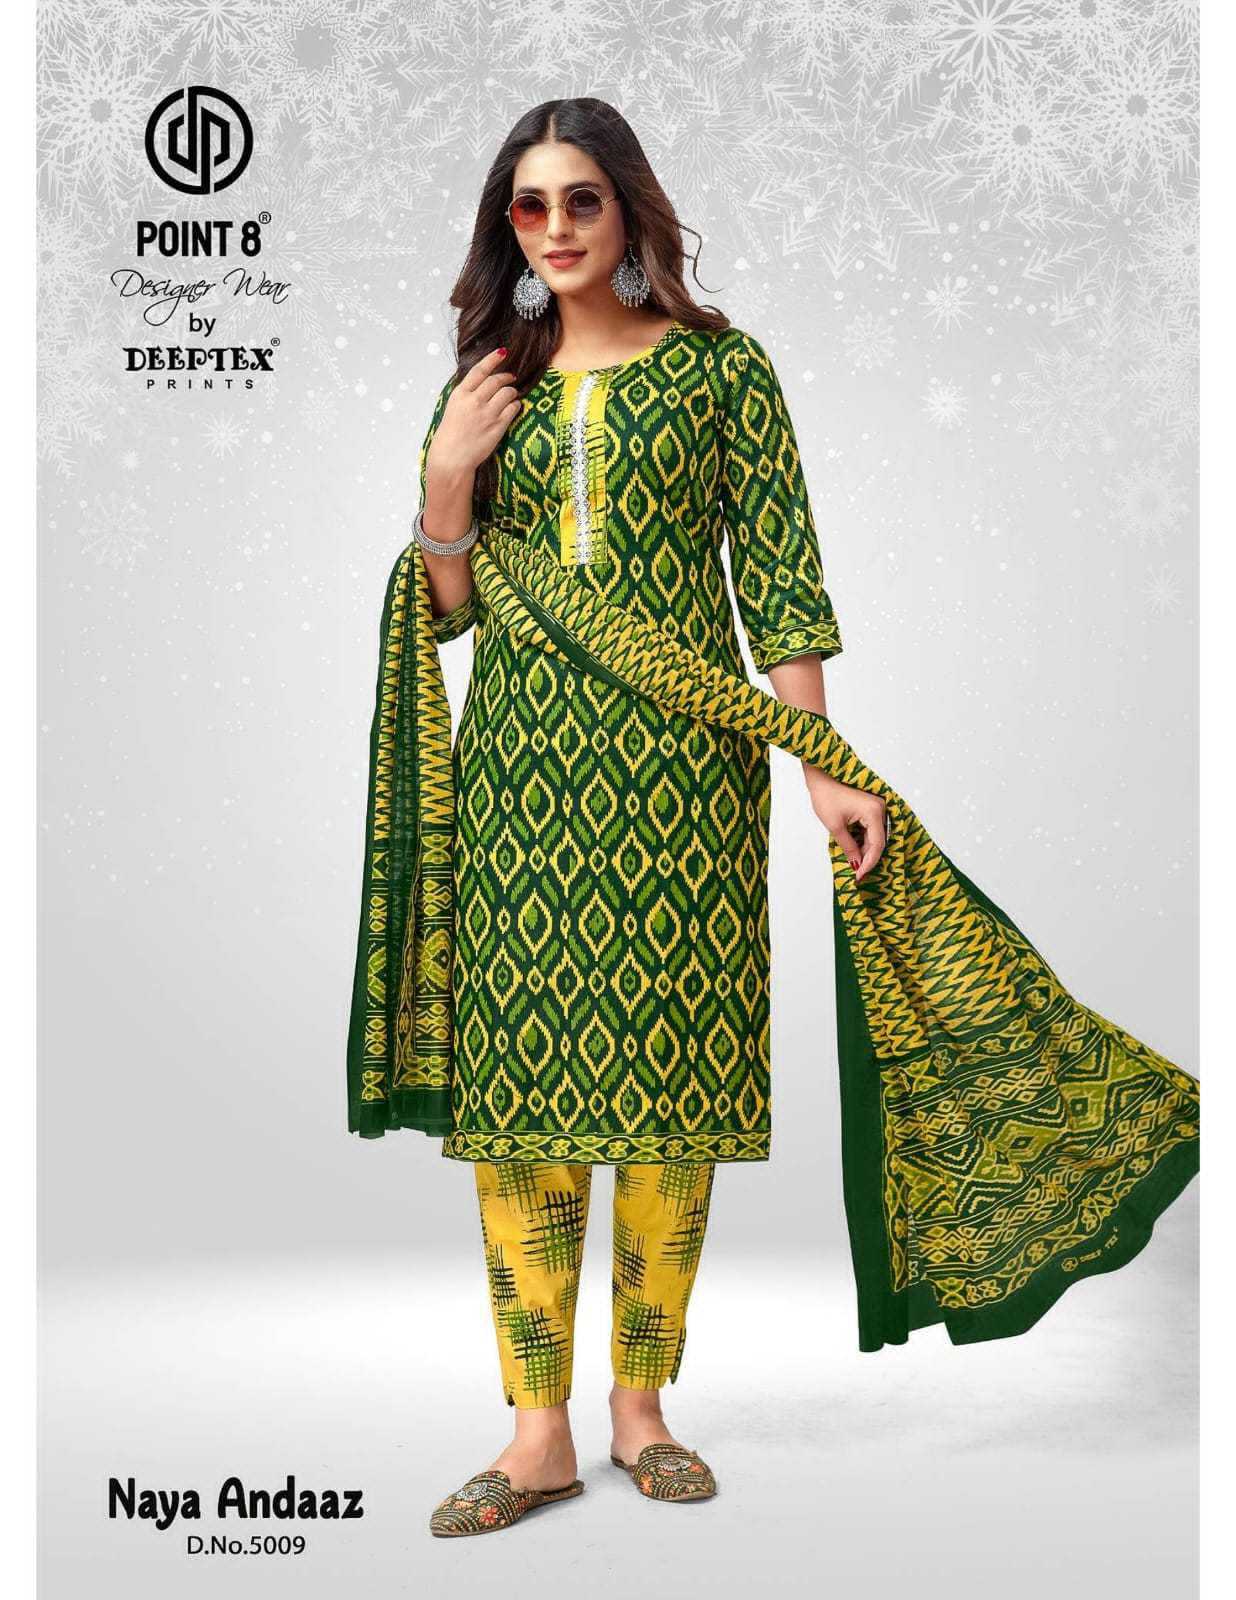 naya andaaz vol 5 nx by deeptex point 8 readymade cotton suit